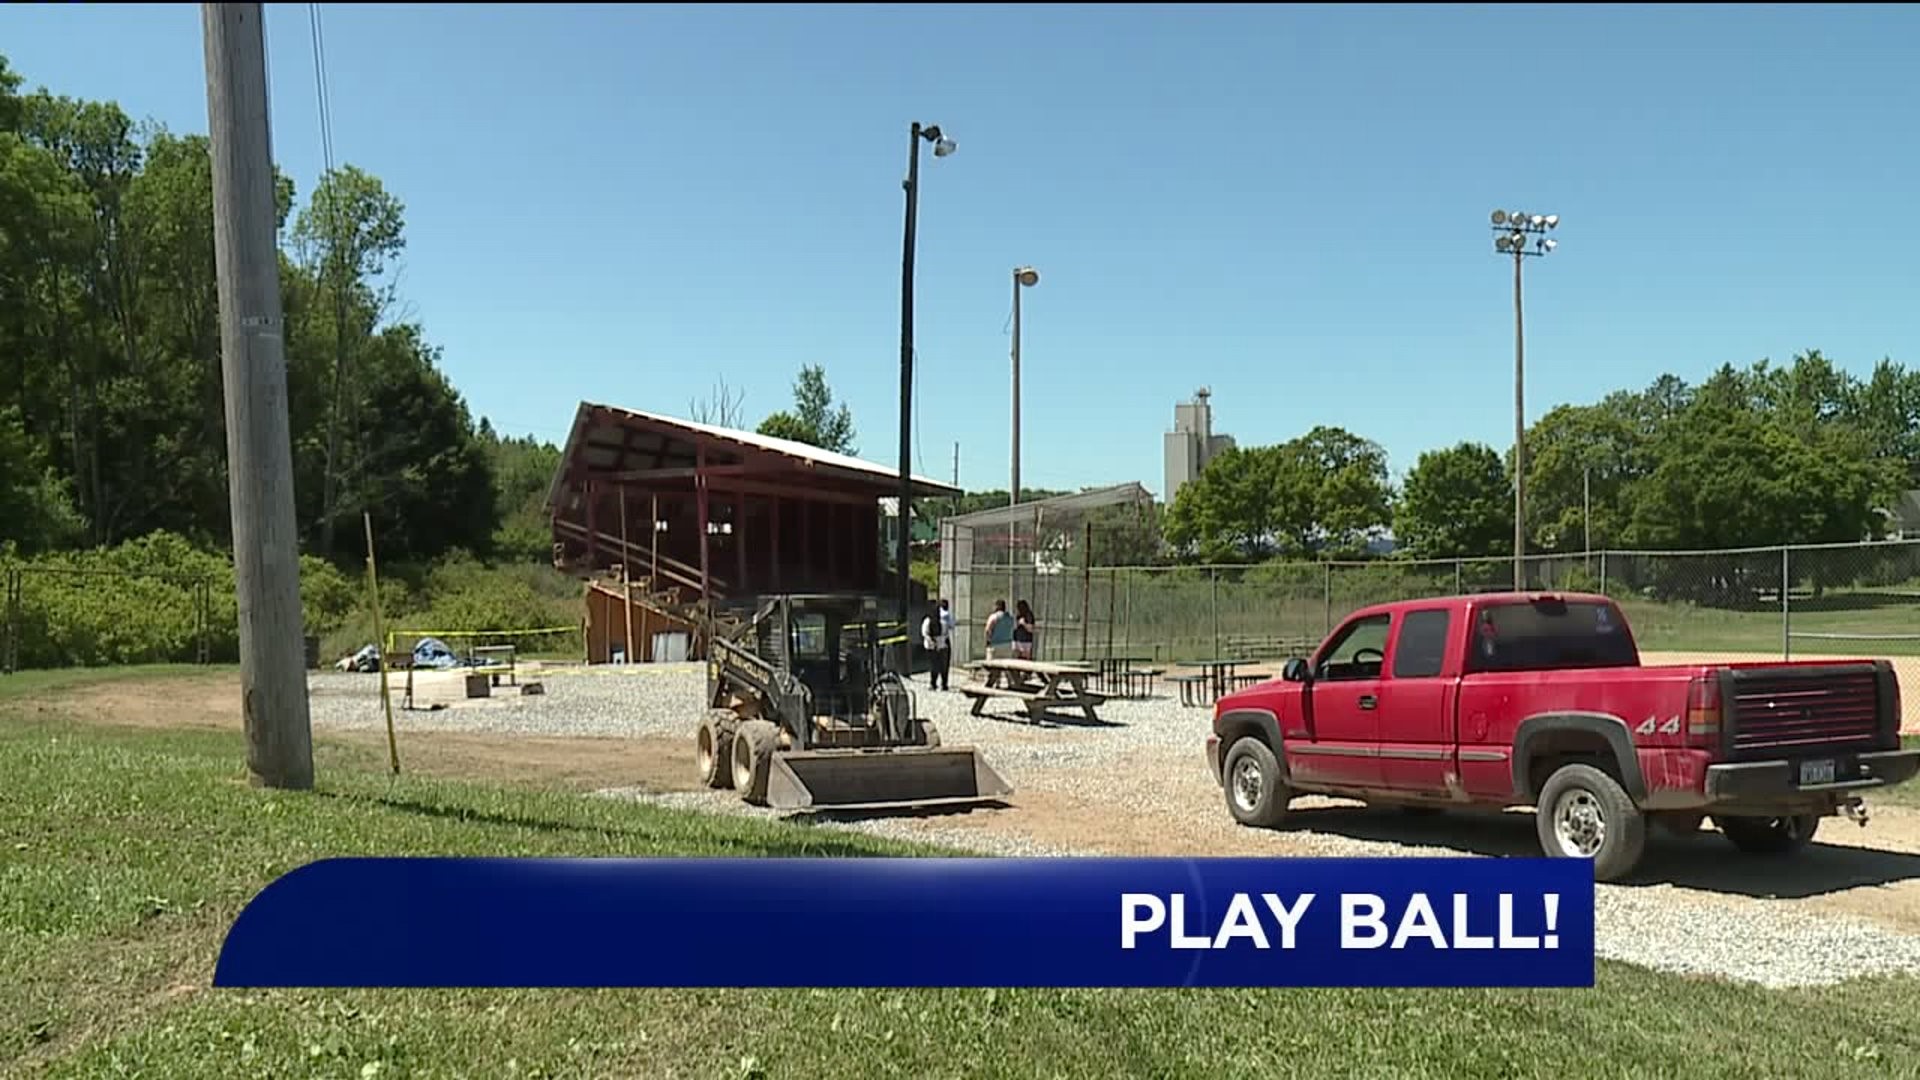 Volunteers Pitch In to Ready Field for Softball Tournament